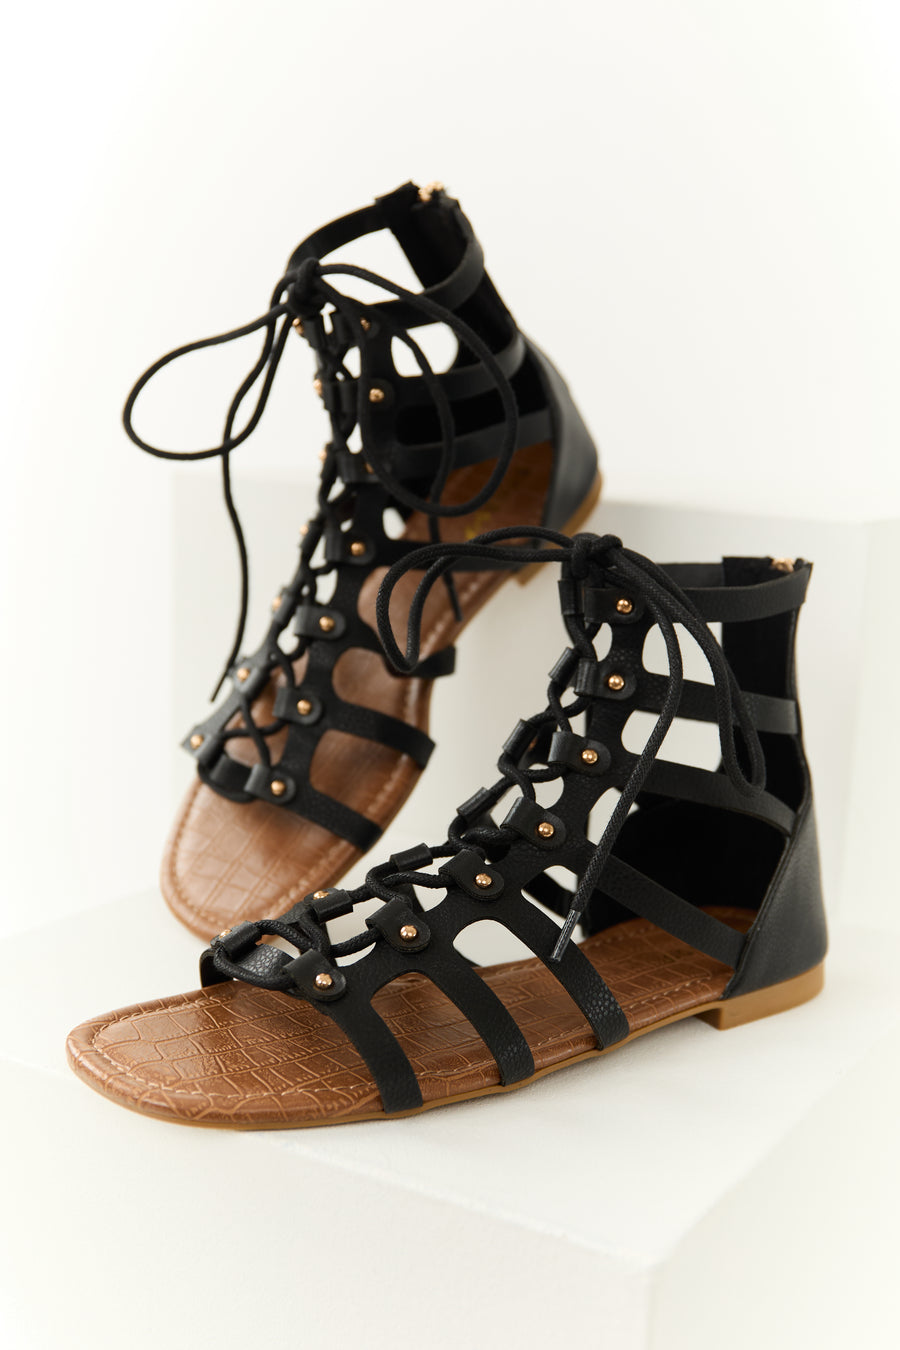 Black Lace Up Open Toed Gladiator Sandals